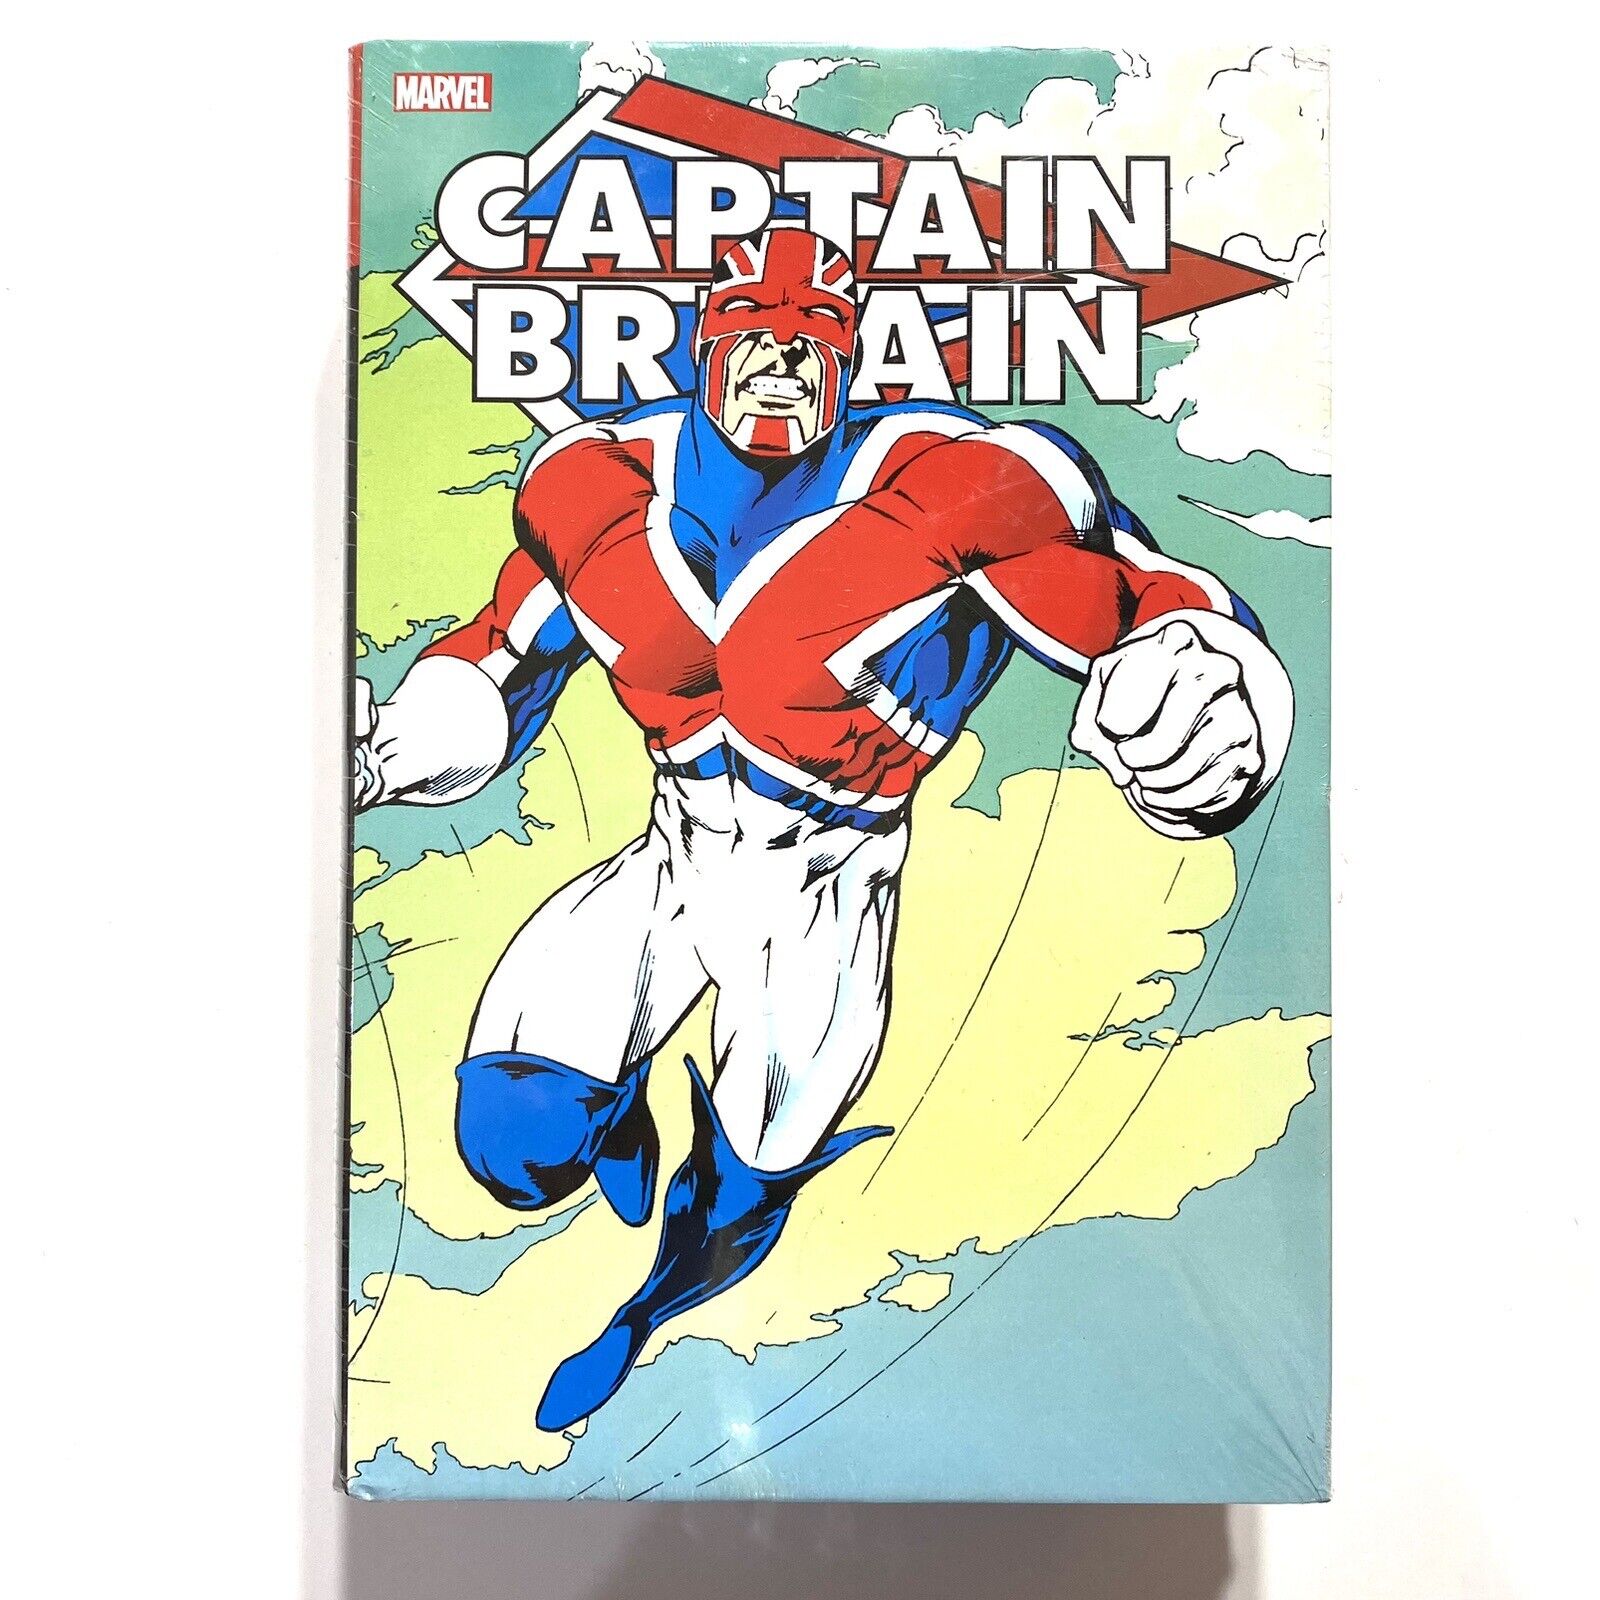 Captain Britain Omnibus New Sealed Ships From United States of America